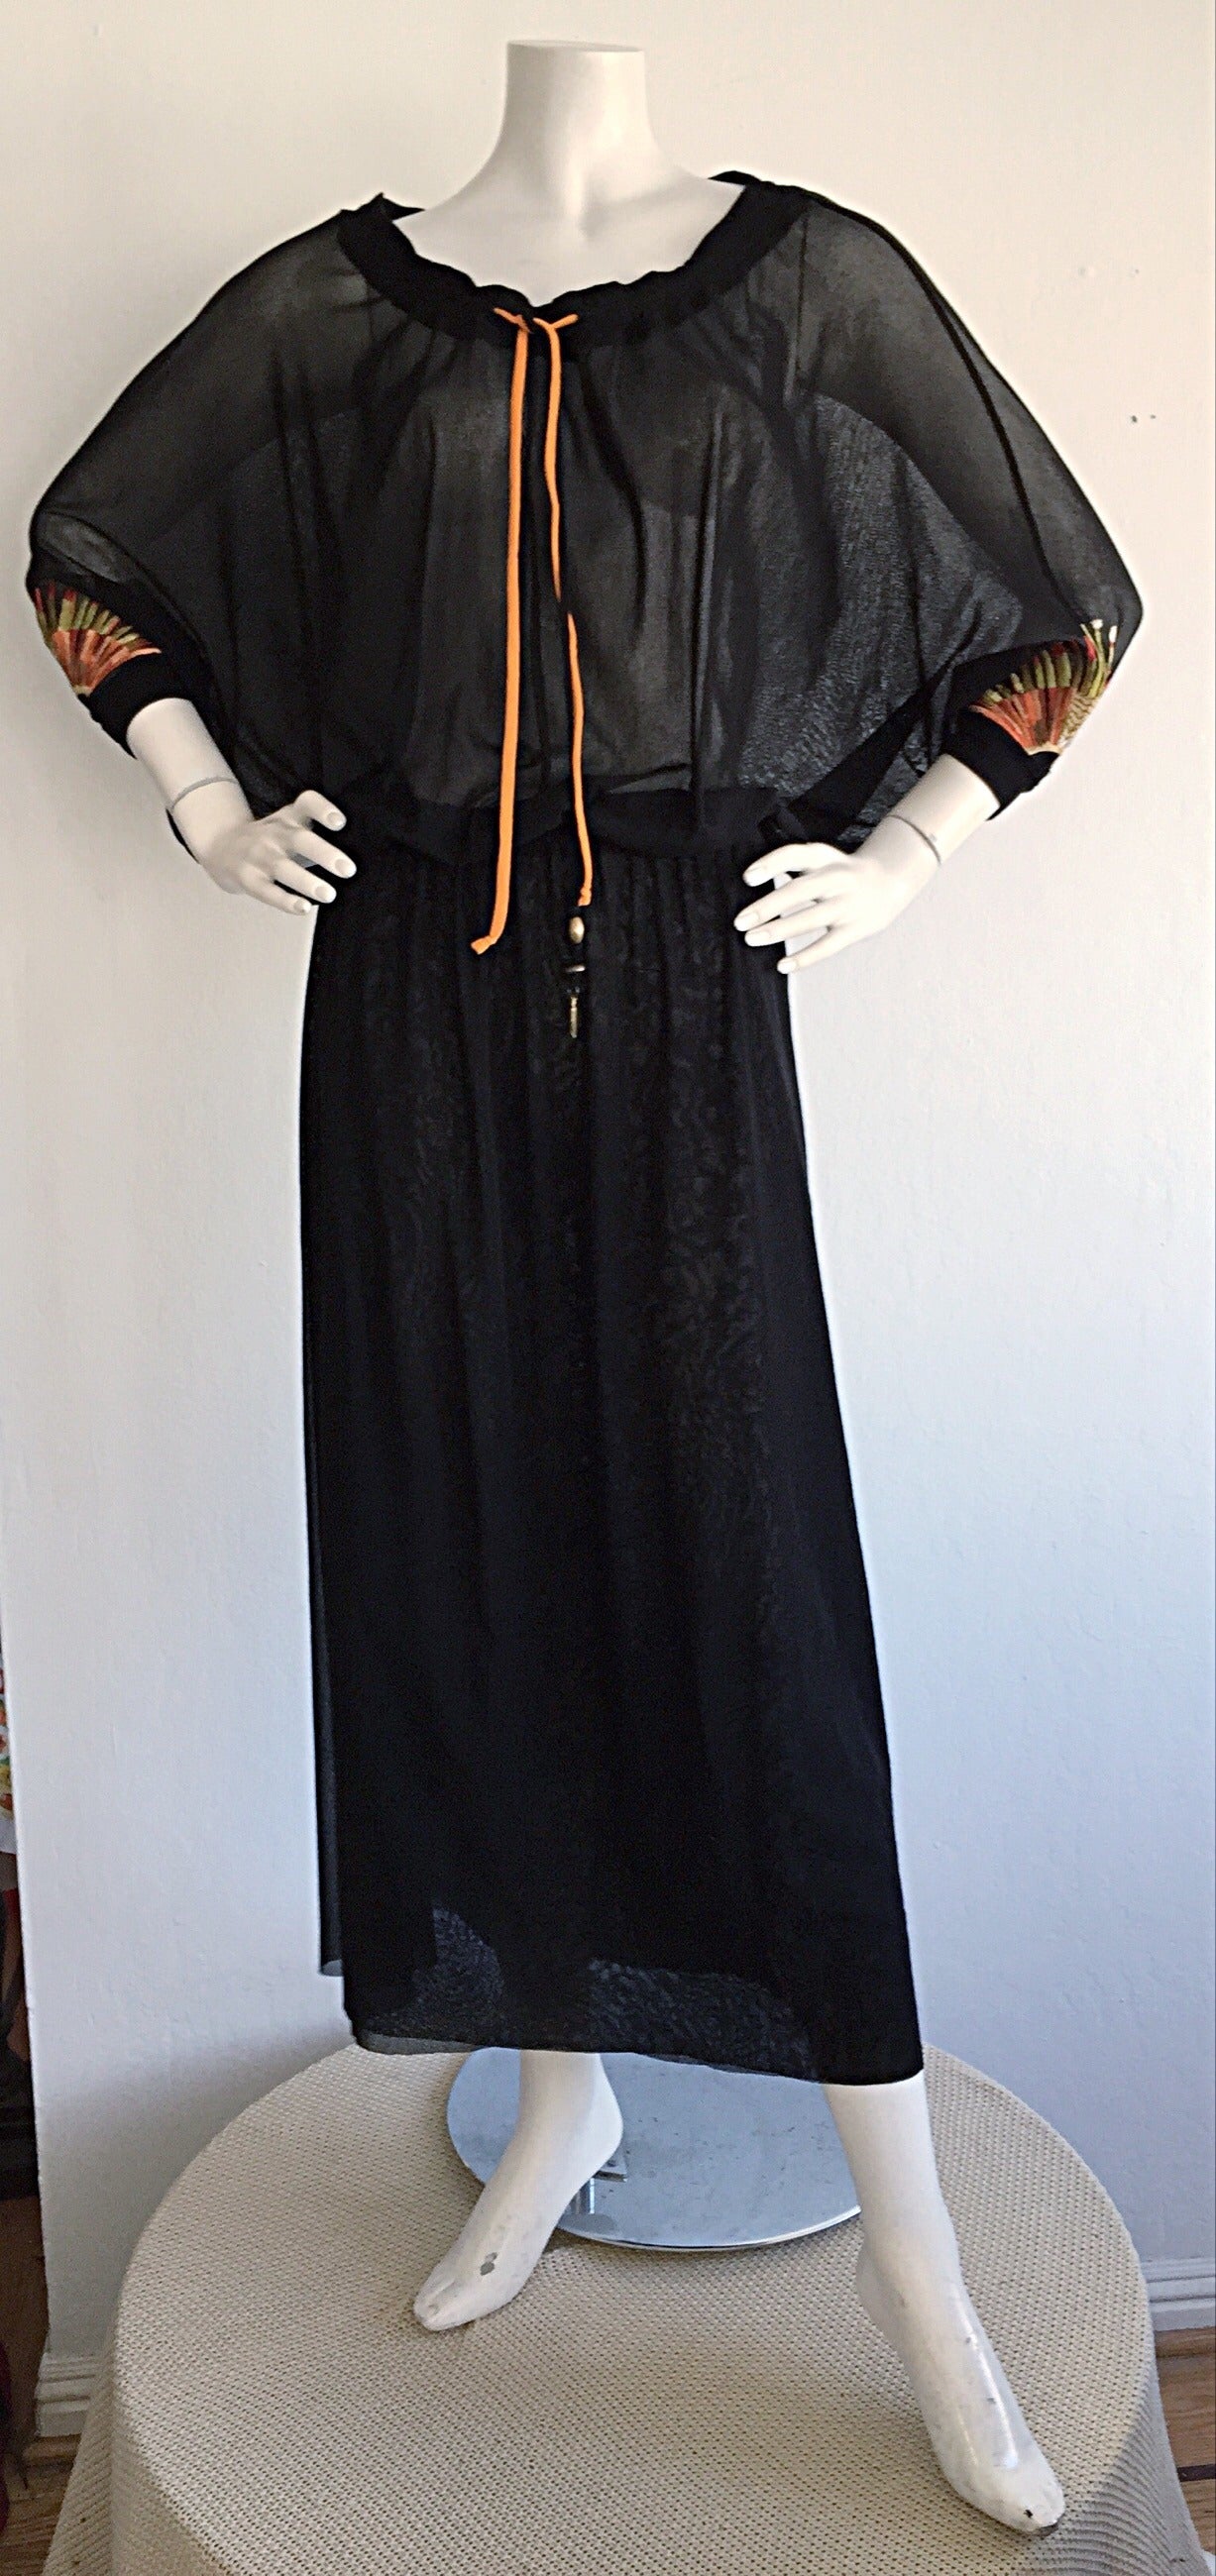 Incredible 1990s Vintage Jean Paul Gaultier caftan! Signature black double layered nylon mesh, with drawstring neck. Two silk drawstrings of orange and black, with decorative charms, can be let loose, or tied for a tighter fit. Embroidered sunbursts